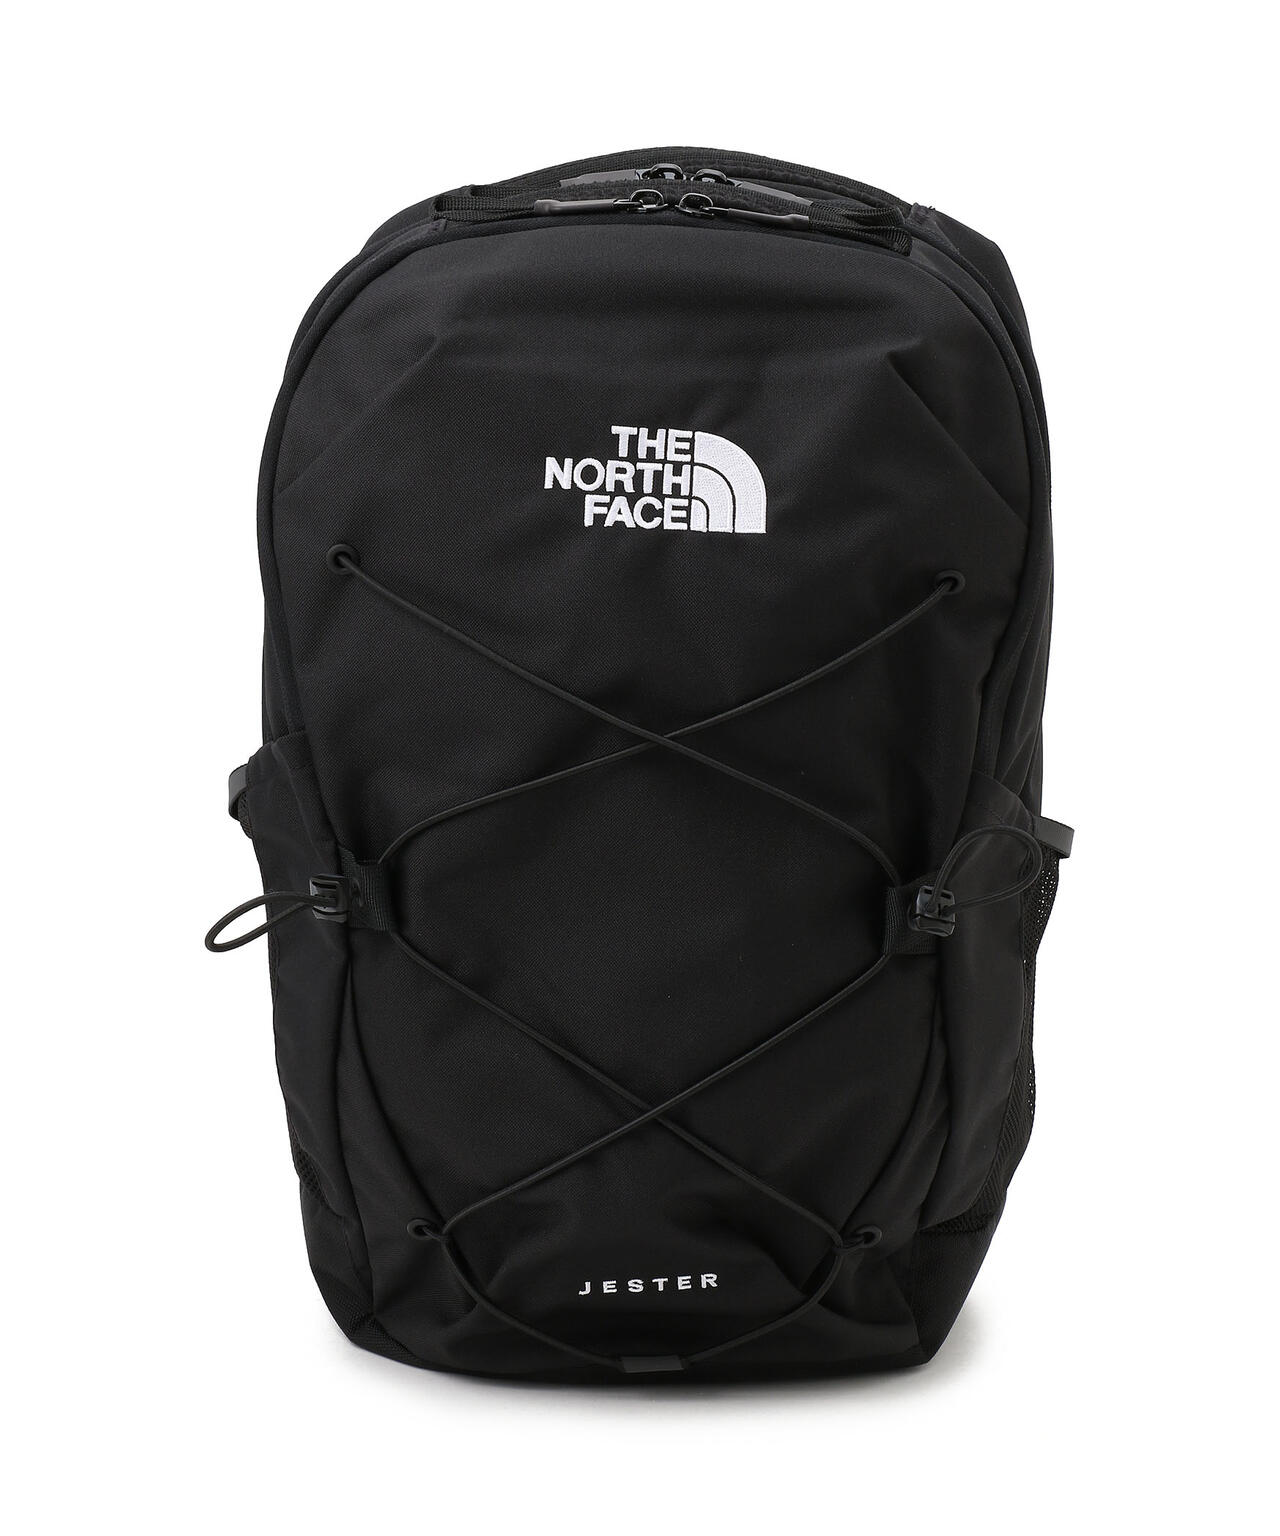 THE NORTH FACE リュックサック　JESTER